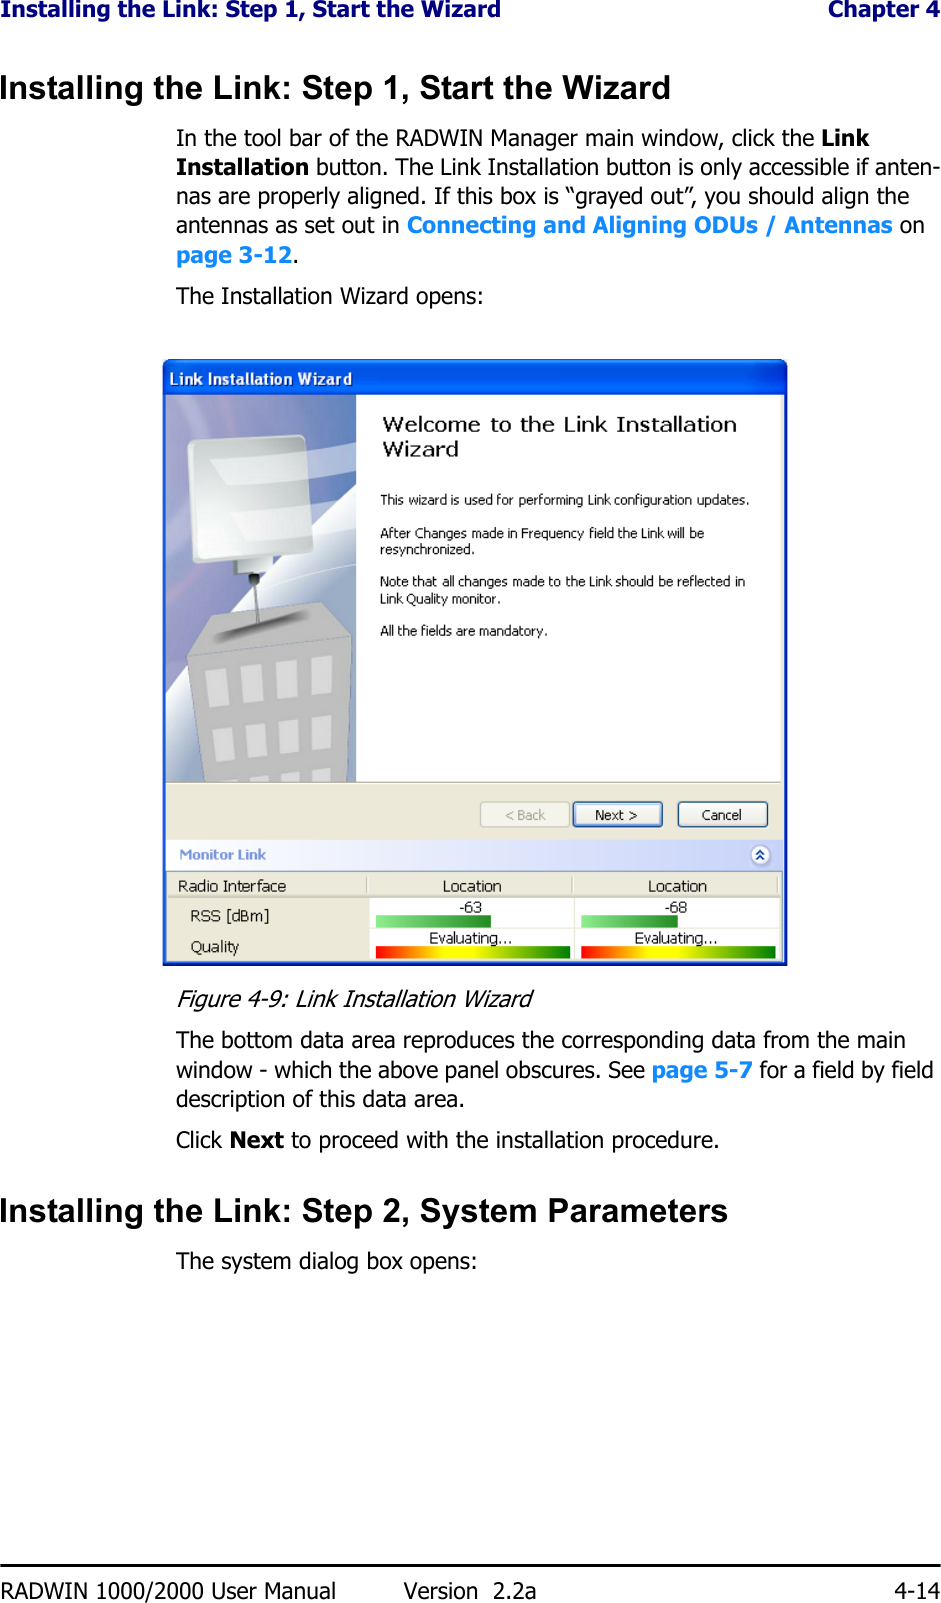 Installing the Link: Step 1, Start the Wizard  Chapter 4RADWIN 1000/2000 User Manual Version  2.2a 4-14Installing the Link: Step 1, Start the WizardIn the tool bar of the RADWIN Manager main window, click the Link Installation button. The Link Installation button is only accessible if anten-nas are properly aligned. If this box is “grayed out”, you should align the antennas as set out in Connecting and Aligning ODUs / Antennas on page 3-12.The Installation Wizard opens:Figure 4-9: Link Installation WizardThe bottom data area reproduces the corresponding data from the main window - which the above panel obscures. See page 5-7 for a field by field description of this data area.Click Next to proceed with the installation procedure.Installing the Link: Step 2, System ParametersThe system dialog box opens: